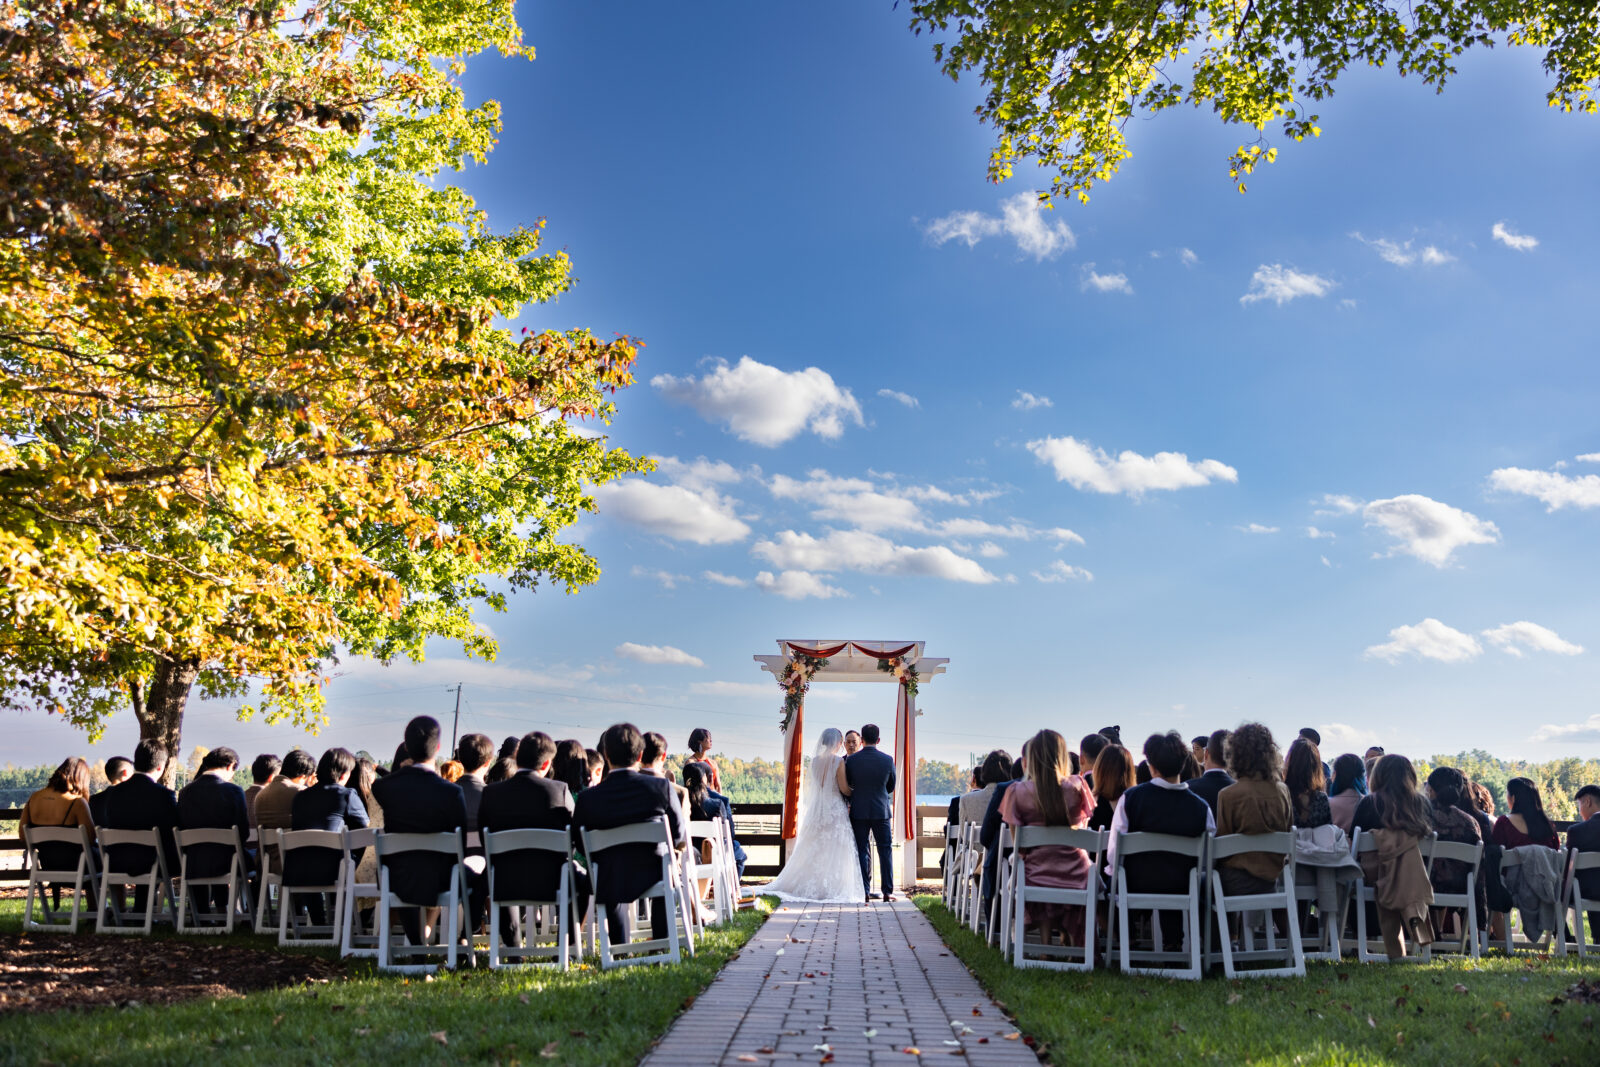 October ceremony outside on the lawn of Tranquility estates in Oxford NC under a blue sky